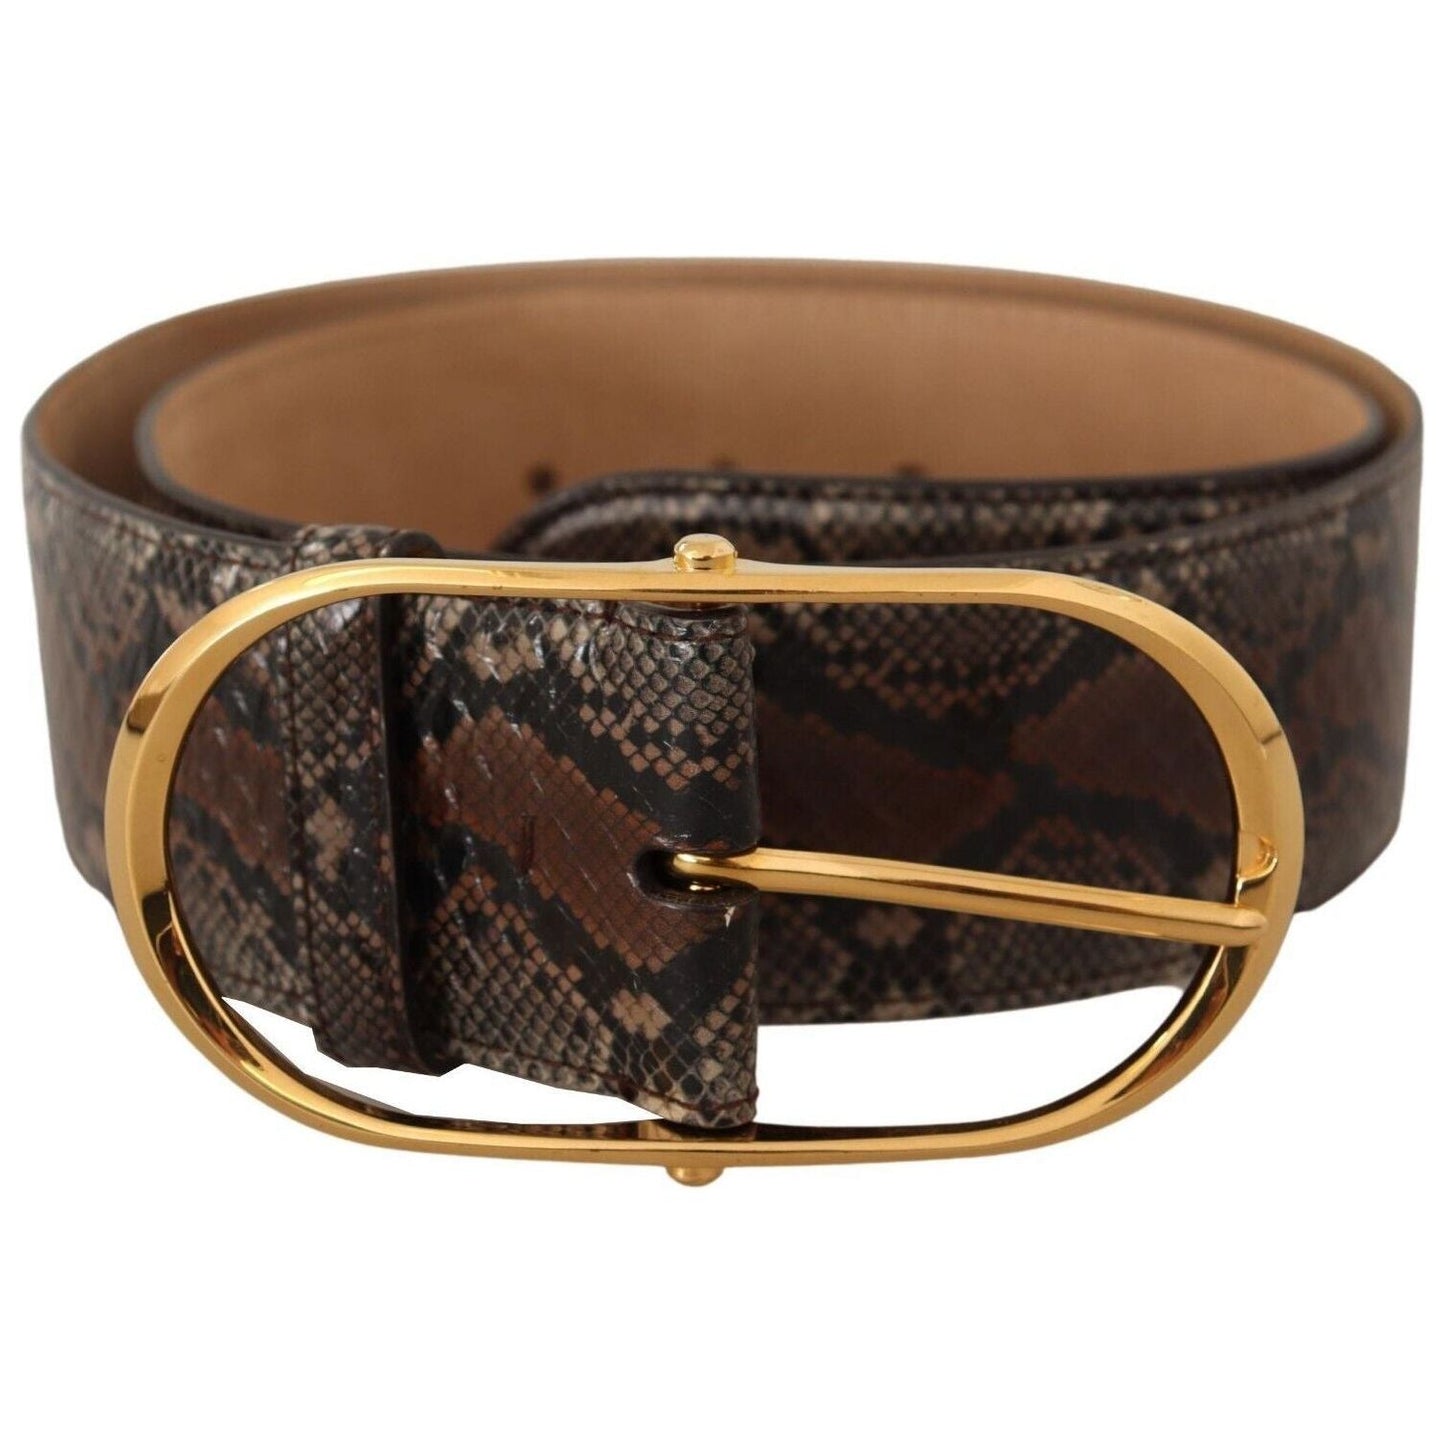 Dolce & Gabbana Elegant Brown Leather Belt with Gold Buckle brown-exotic-leather-gold-oval-buckle-belt-5 WOMAN BELTS